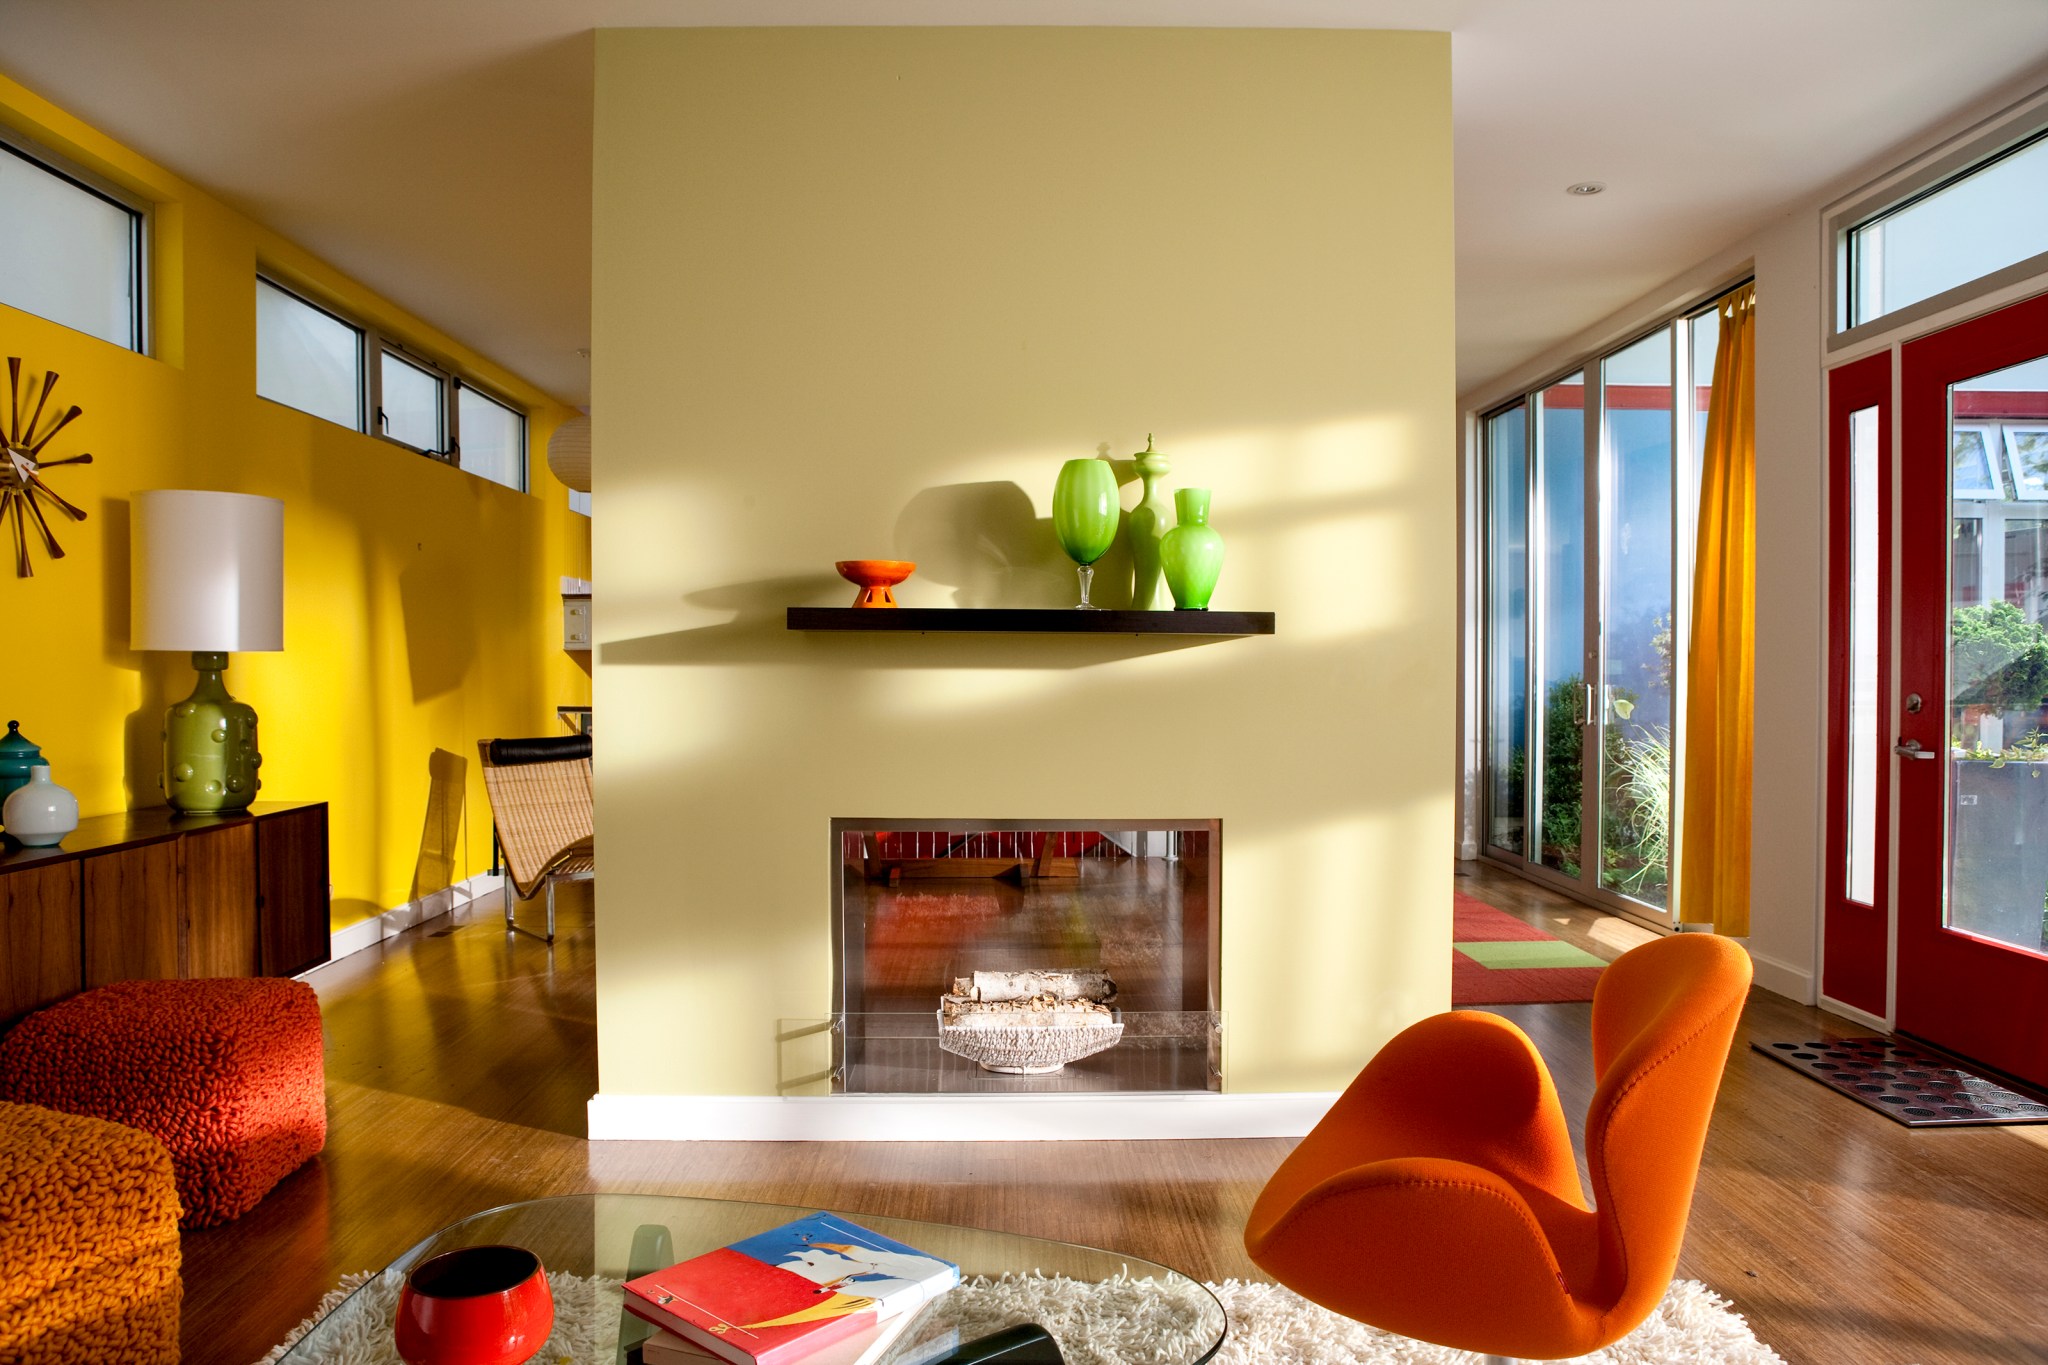 how much does it cost to paint your house image of a mid century modern home painted with bright and warm hues of yellow and orange with green accents and a dual sided fireplace as a focal point